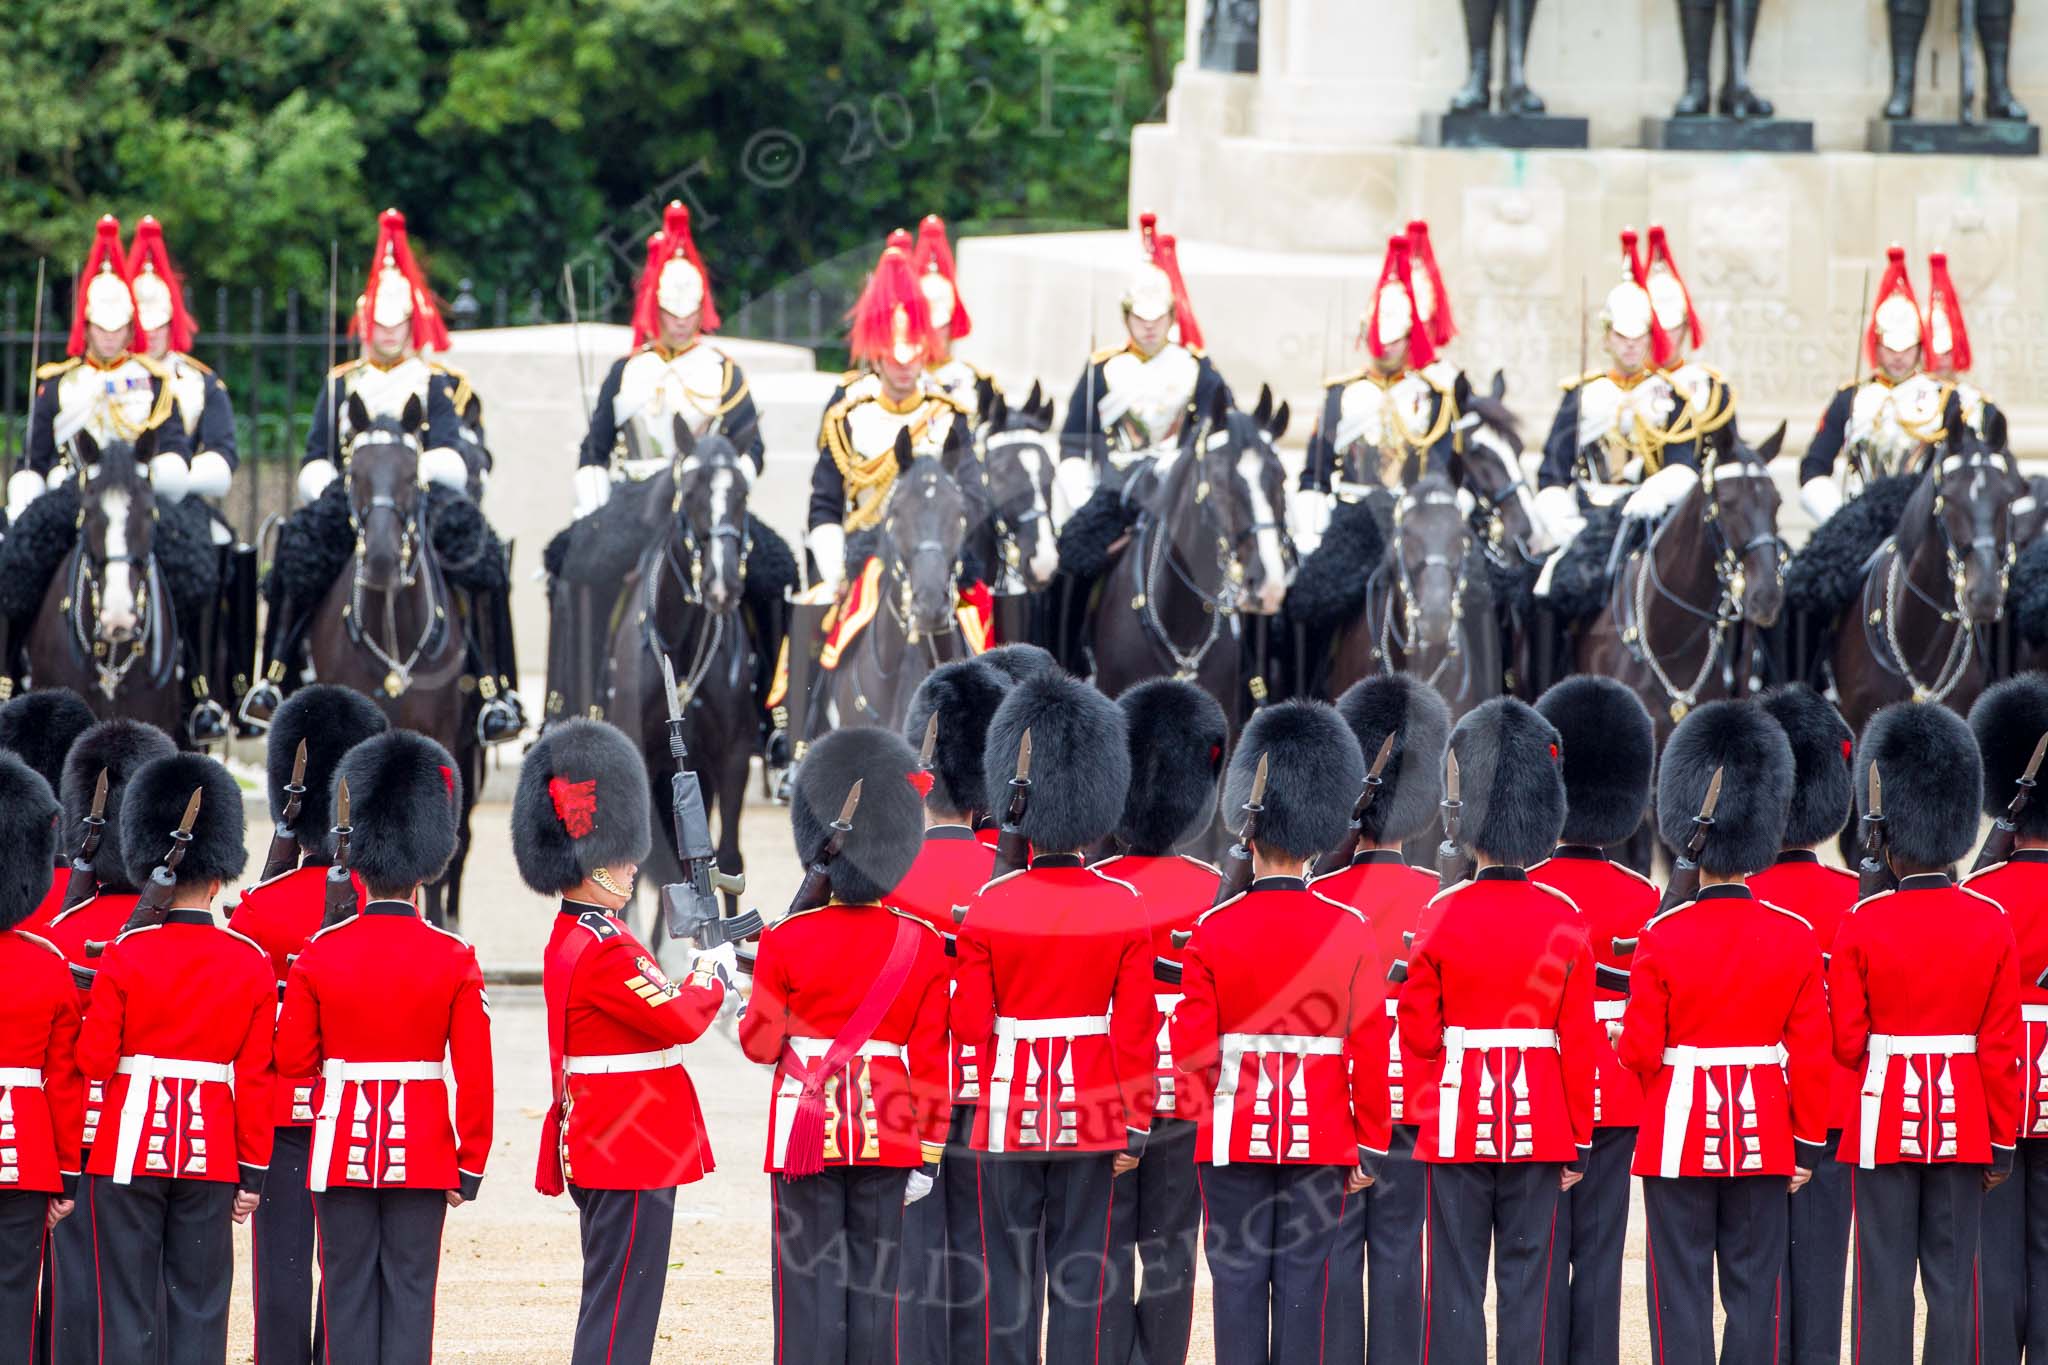 Trooping the Colour 2012: The guardsmen turning around in the process of forming divisions for the next phase of the parade..
Horse Guards Parade, Westminster,
London SW1,

United Kingdom,
on 16 June 2012 at 11:30, image #364